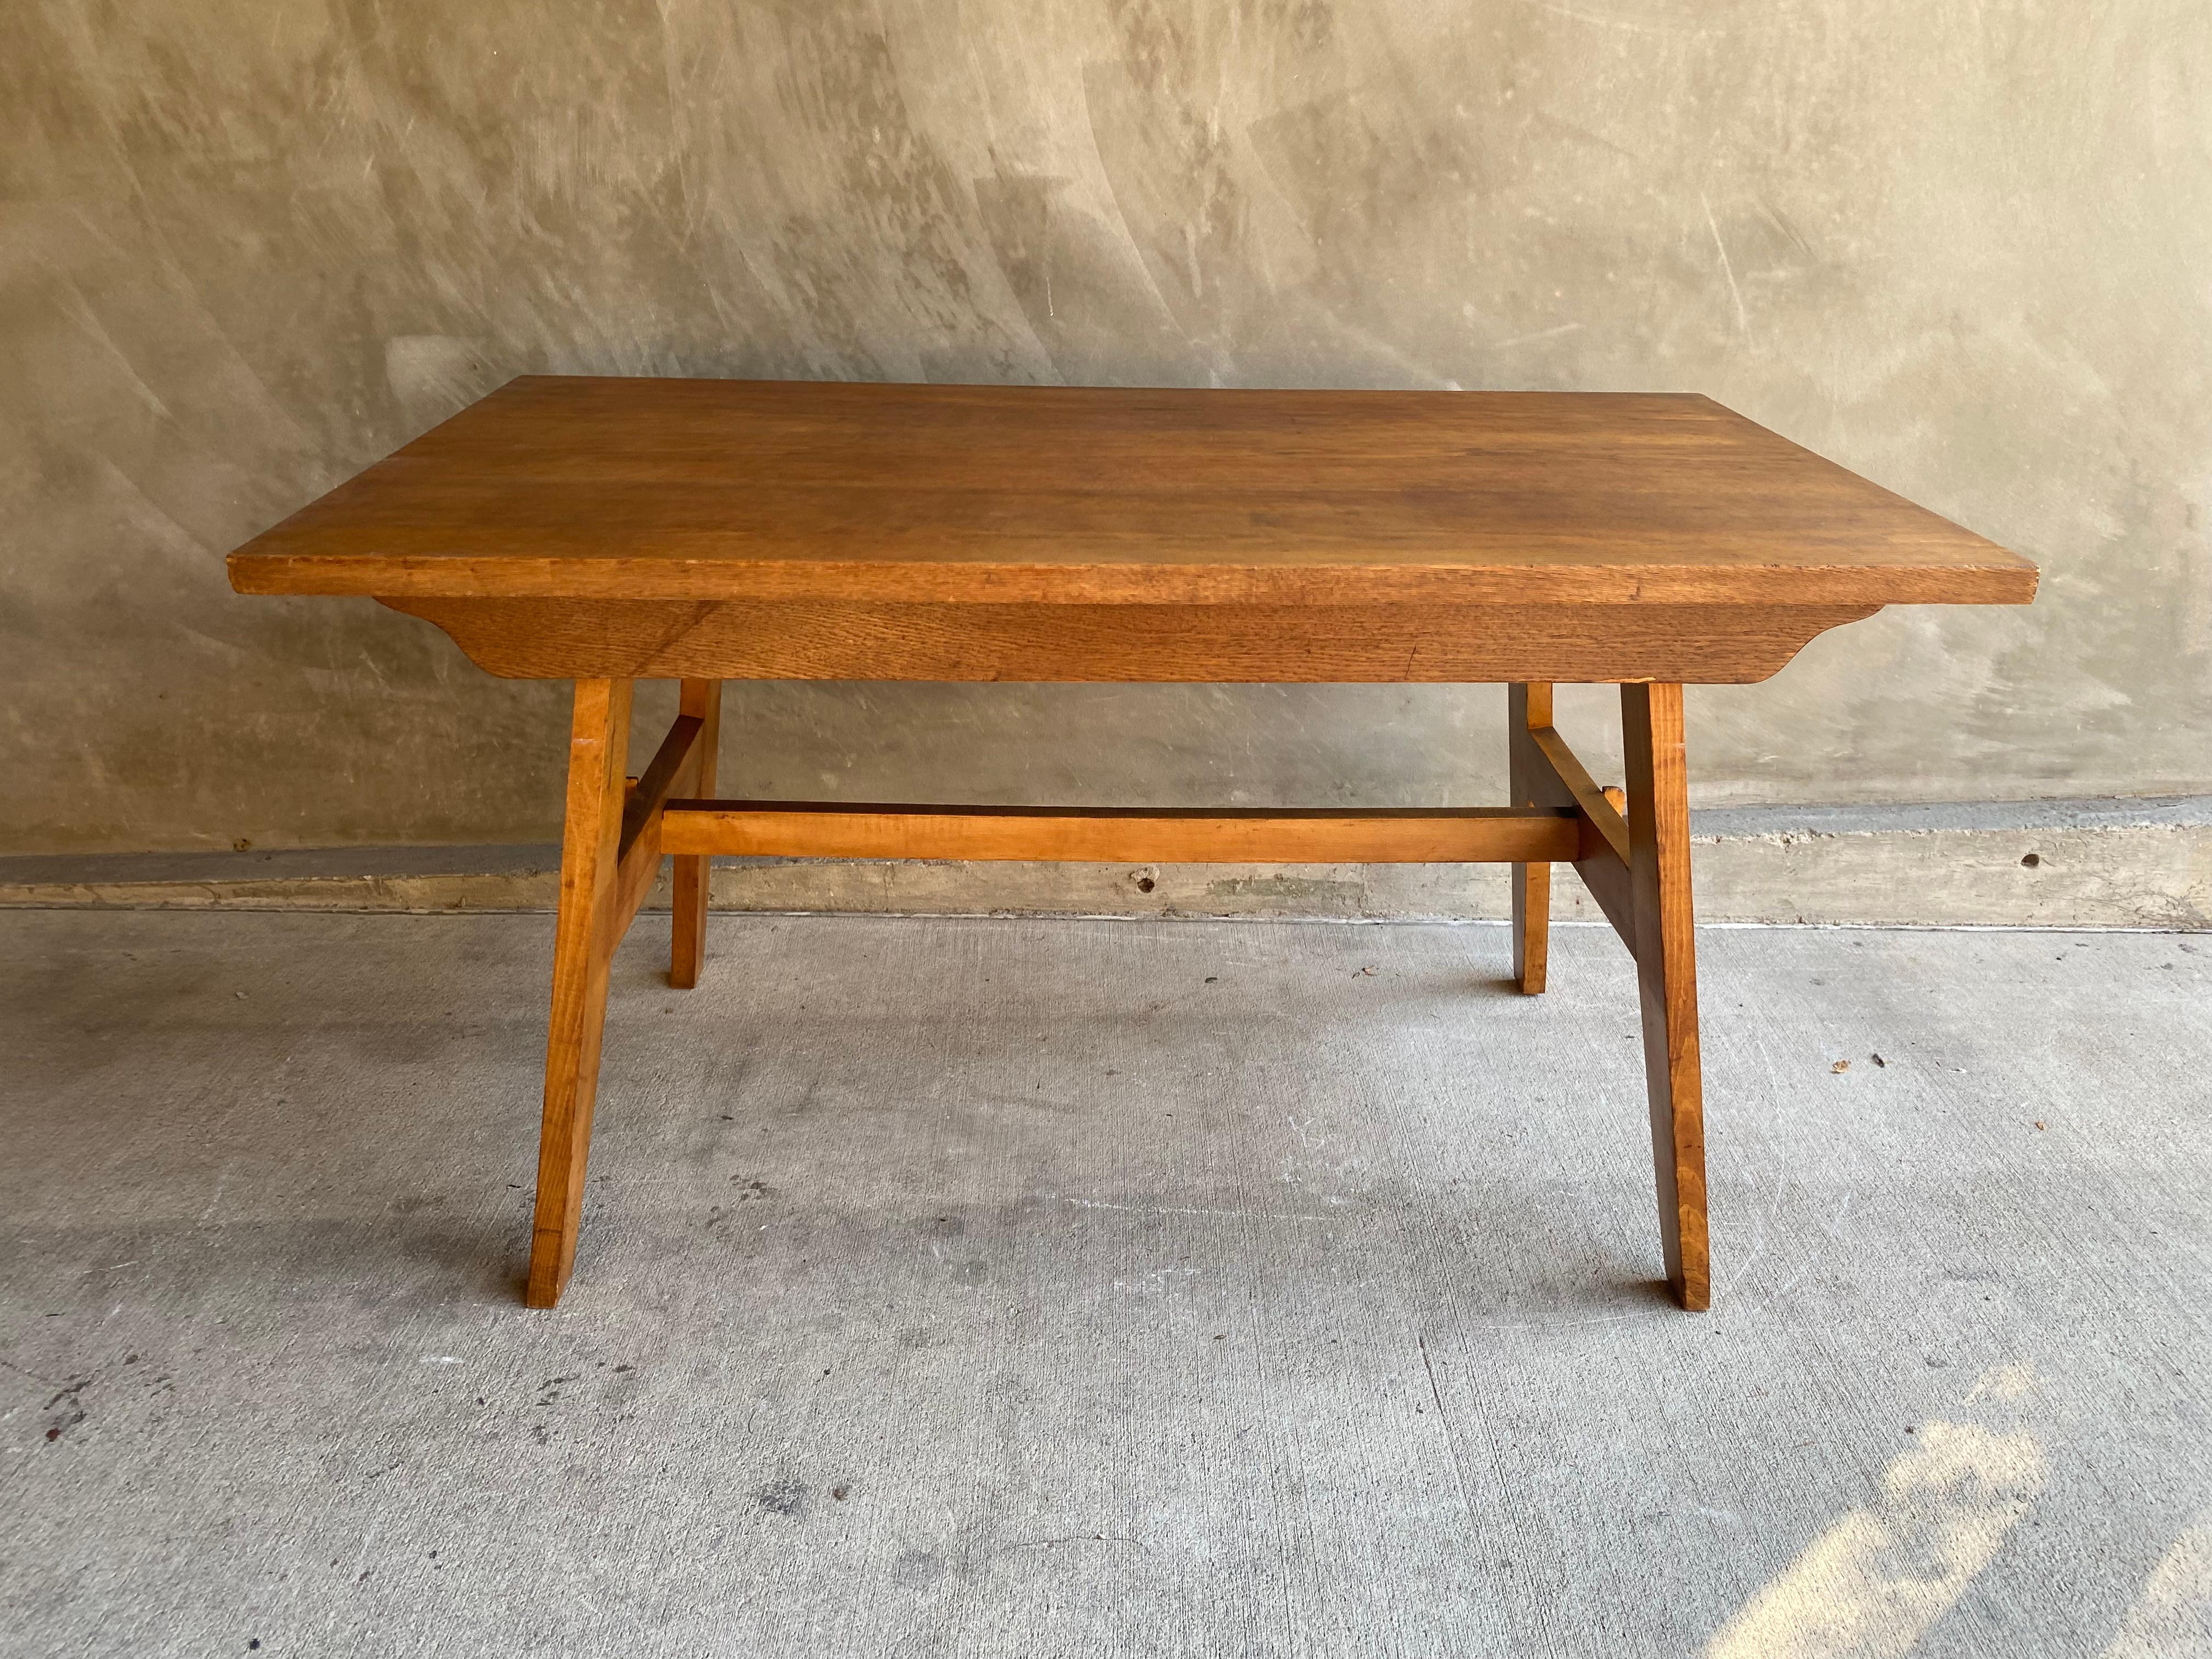 Oak dining table by collectible designer, Rene' Gabriel. From the post-war reconstruction style of modernism or early mid-century modern. Trestle base and apron on long sides. France, 1948-50